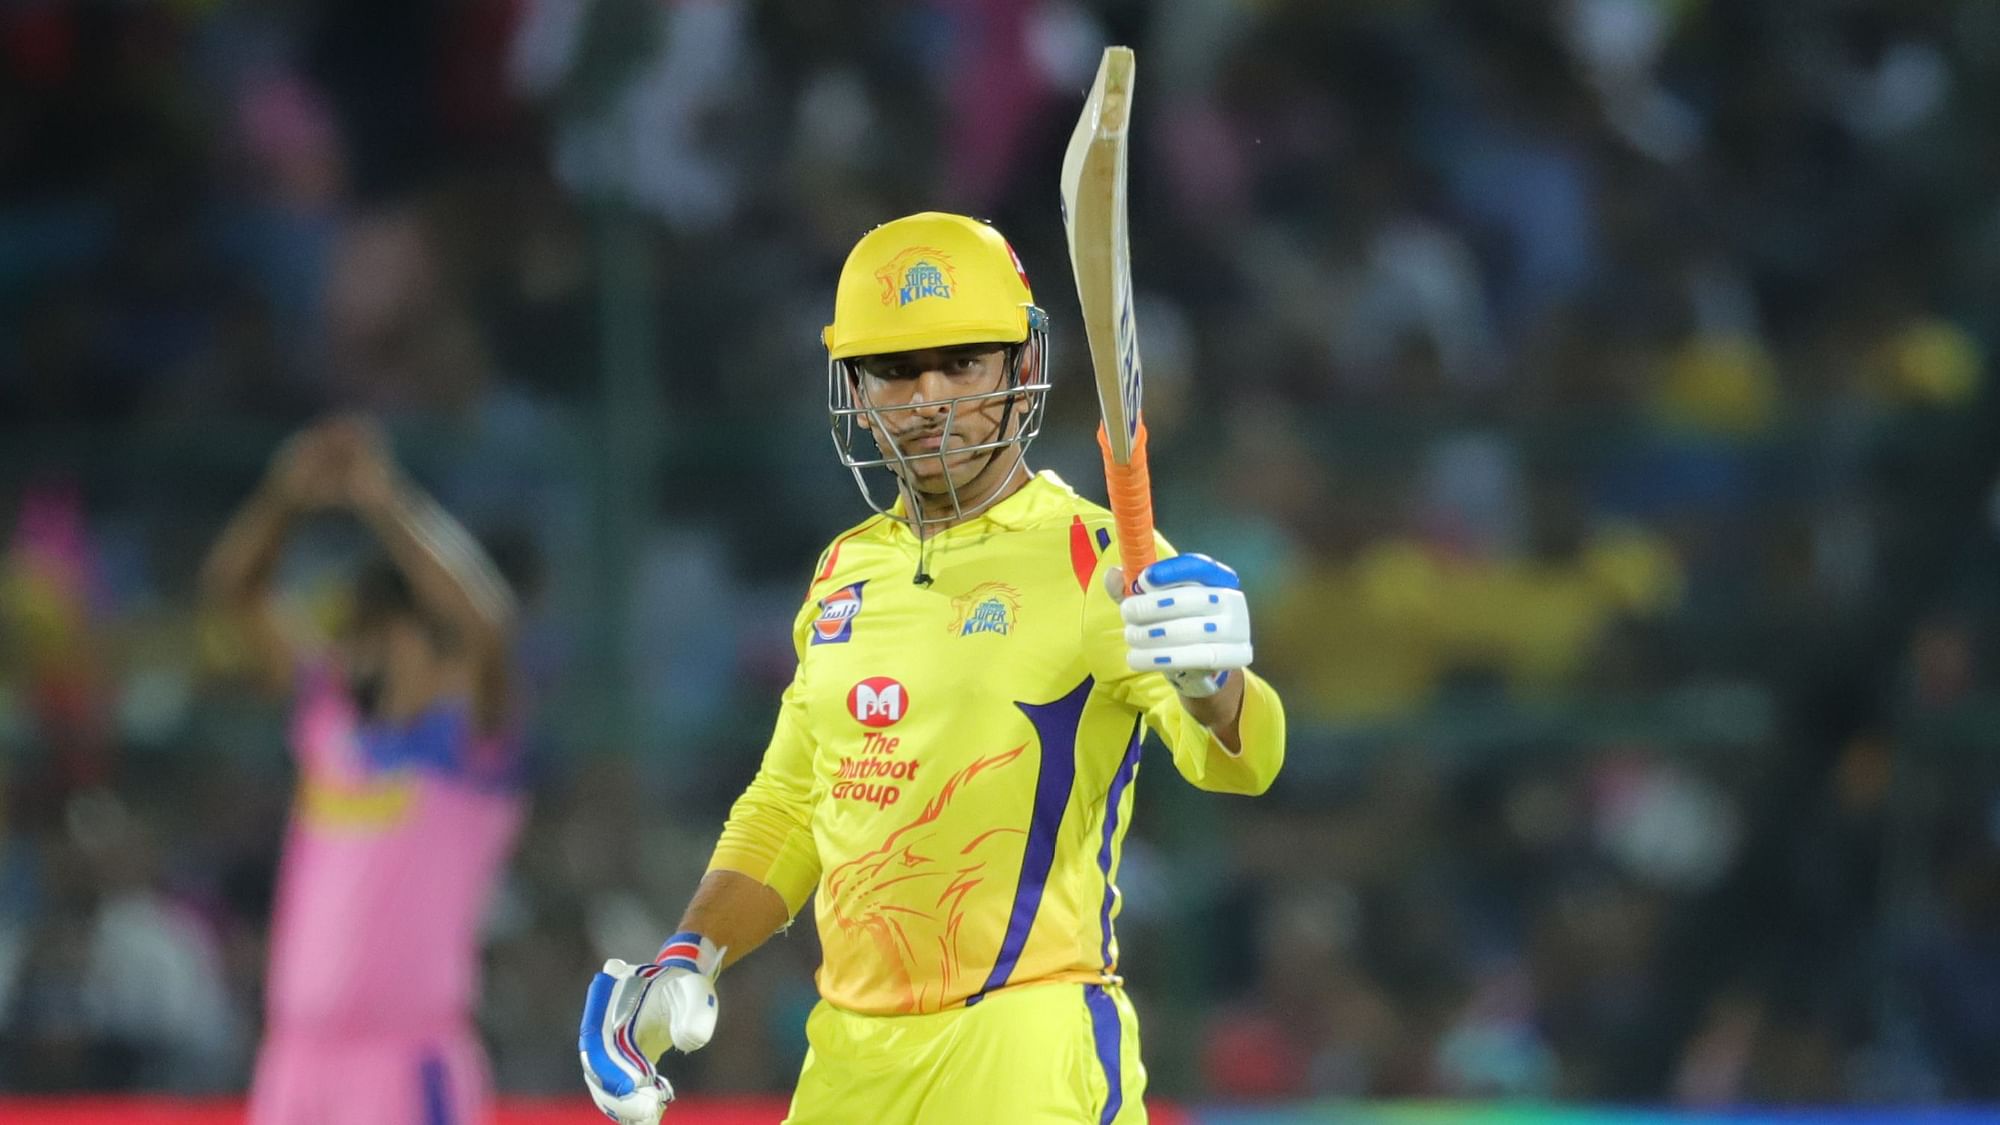 Watch video: MS Dhoni hit six sixes during a practise session for Chennai Super Kings.